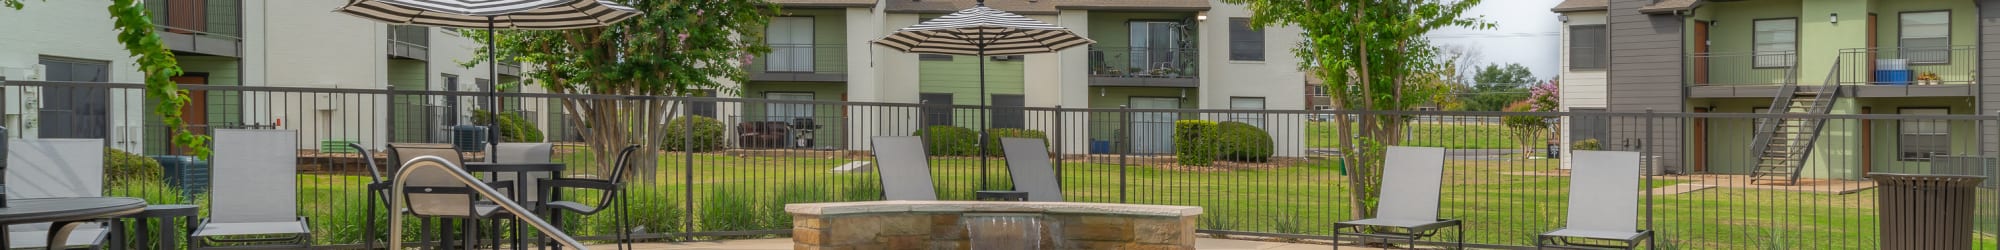 Contact Us | Leander Apartment Homes in Benbrook, Texas